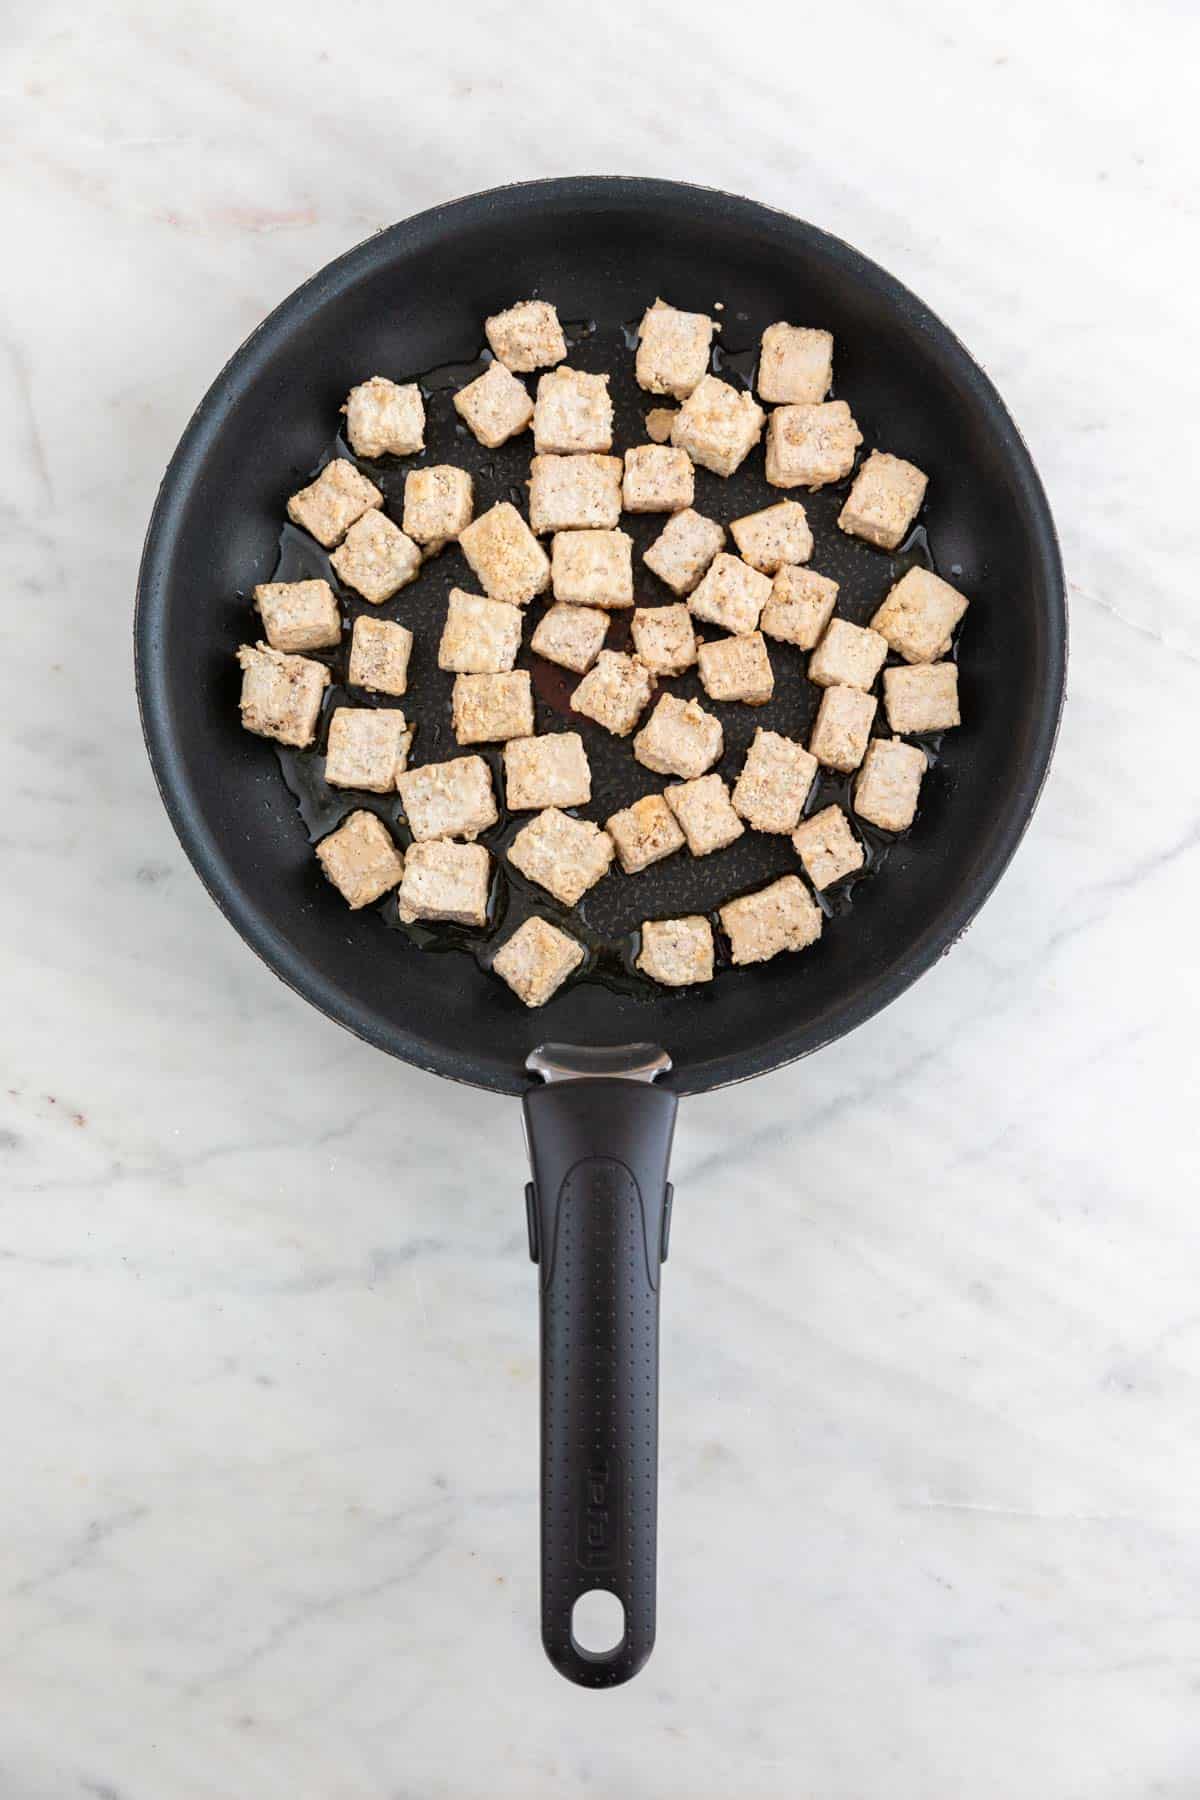 Tofu cubes on a non-stick frying pan with some oil while cooking.